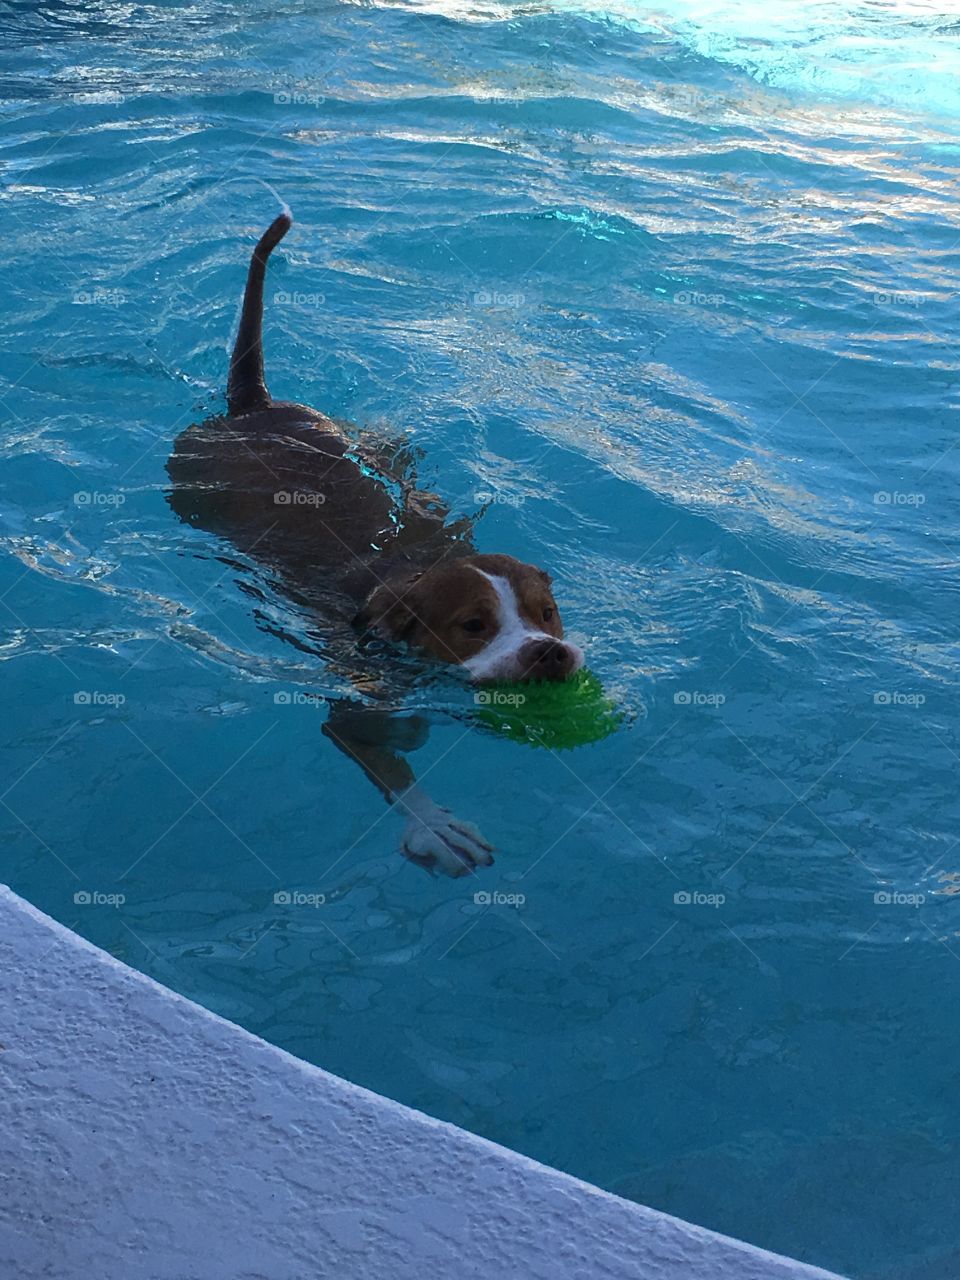 My adorable rescue pitbull dog swimming with his ball